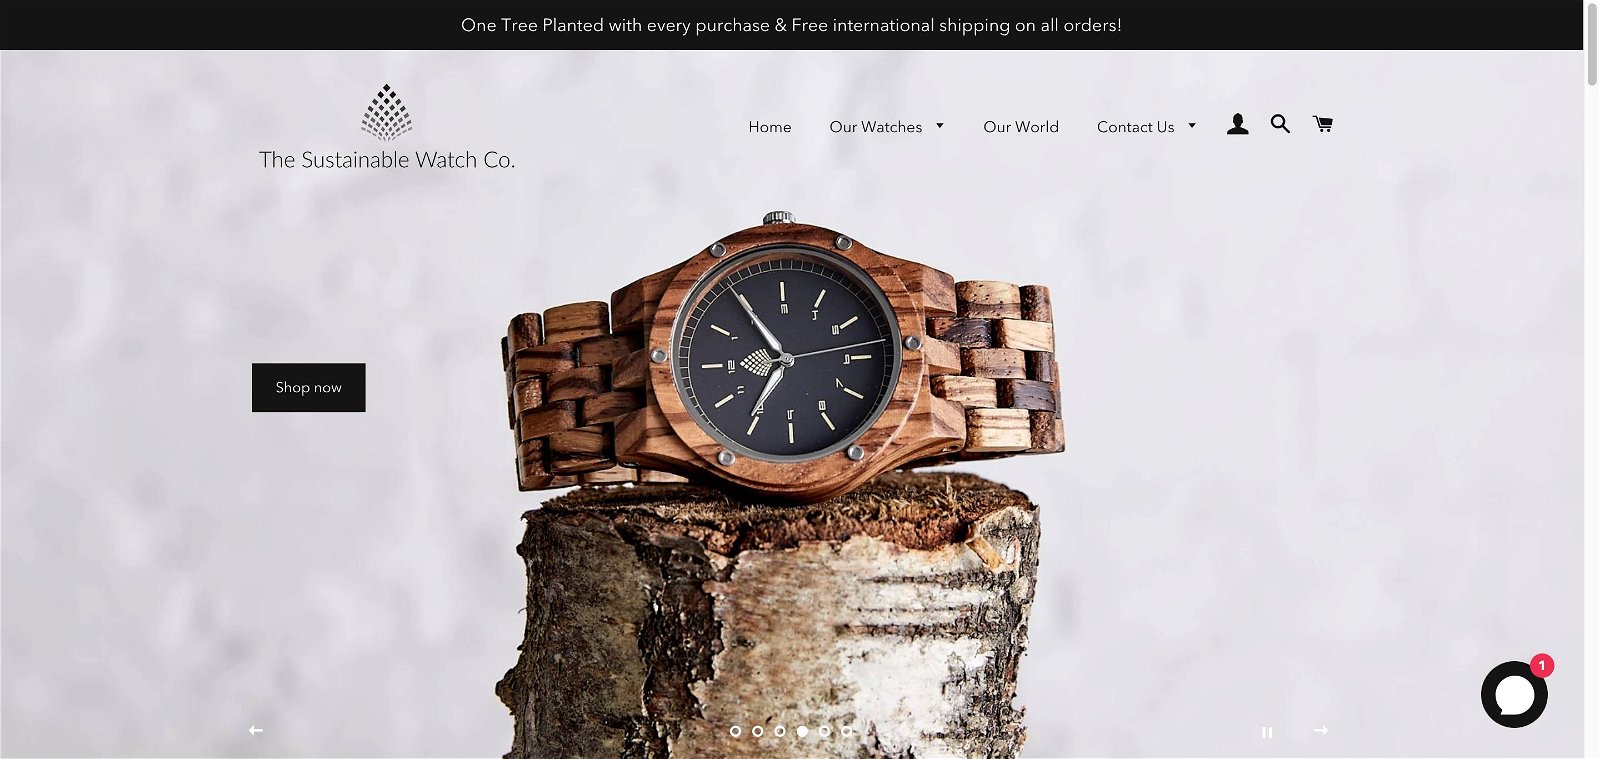 The sustainable watch company.com